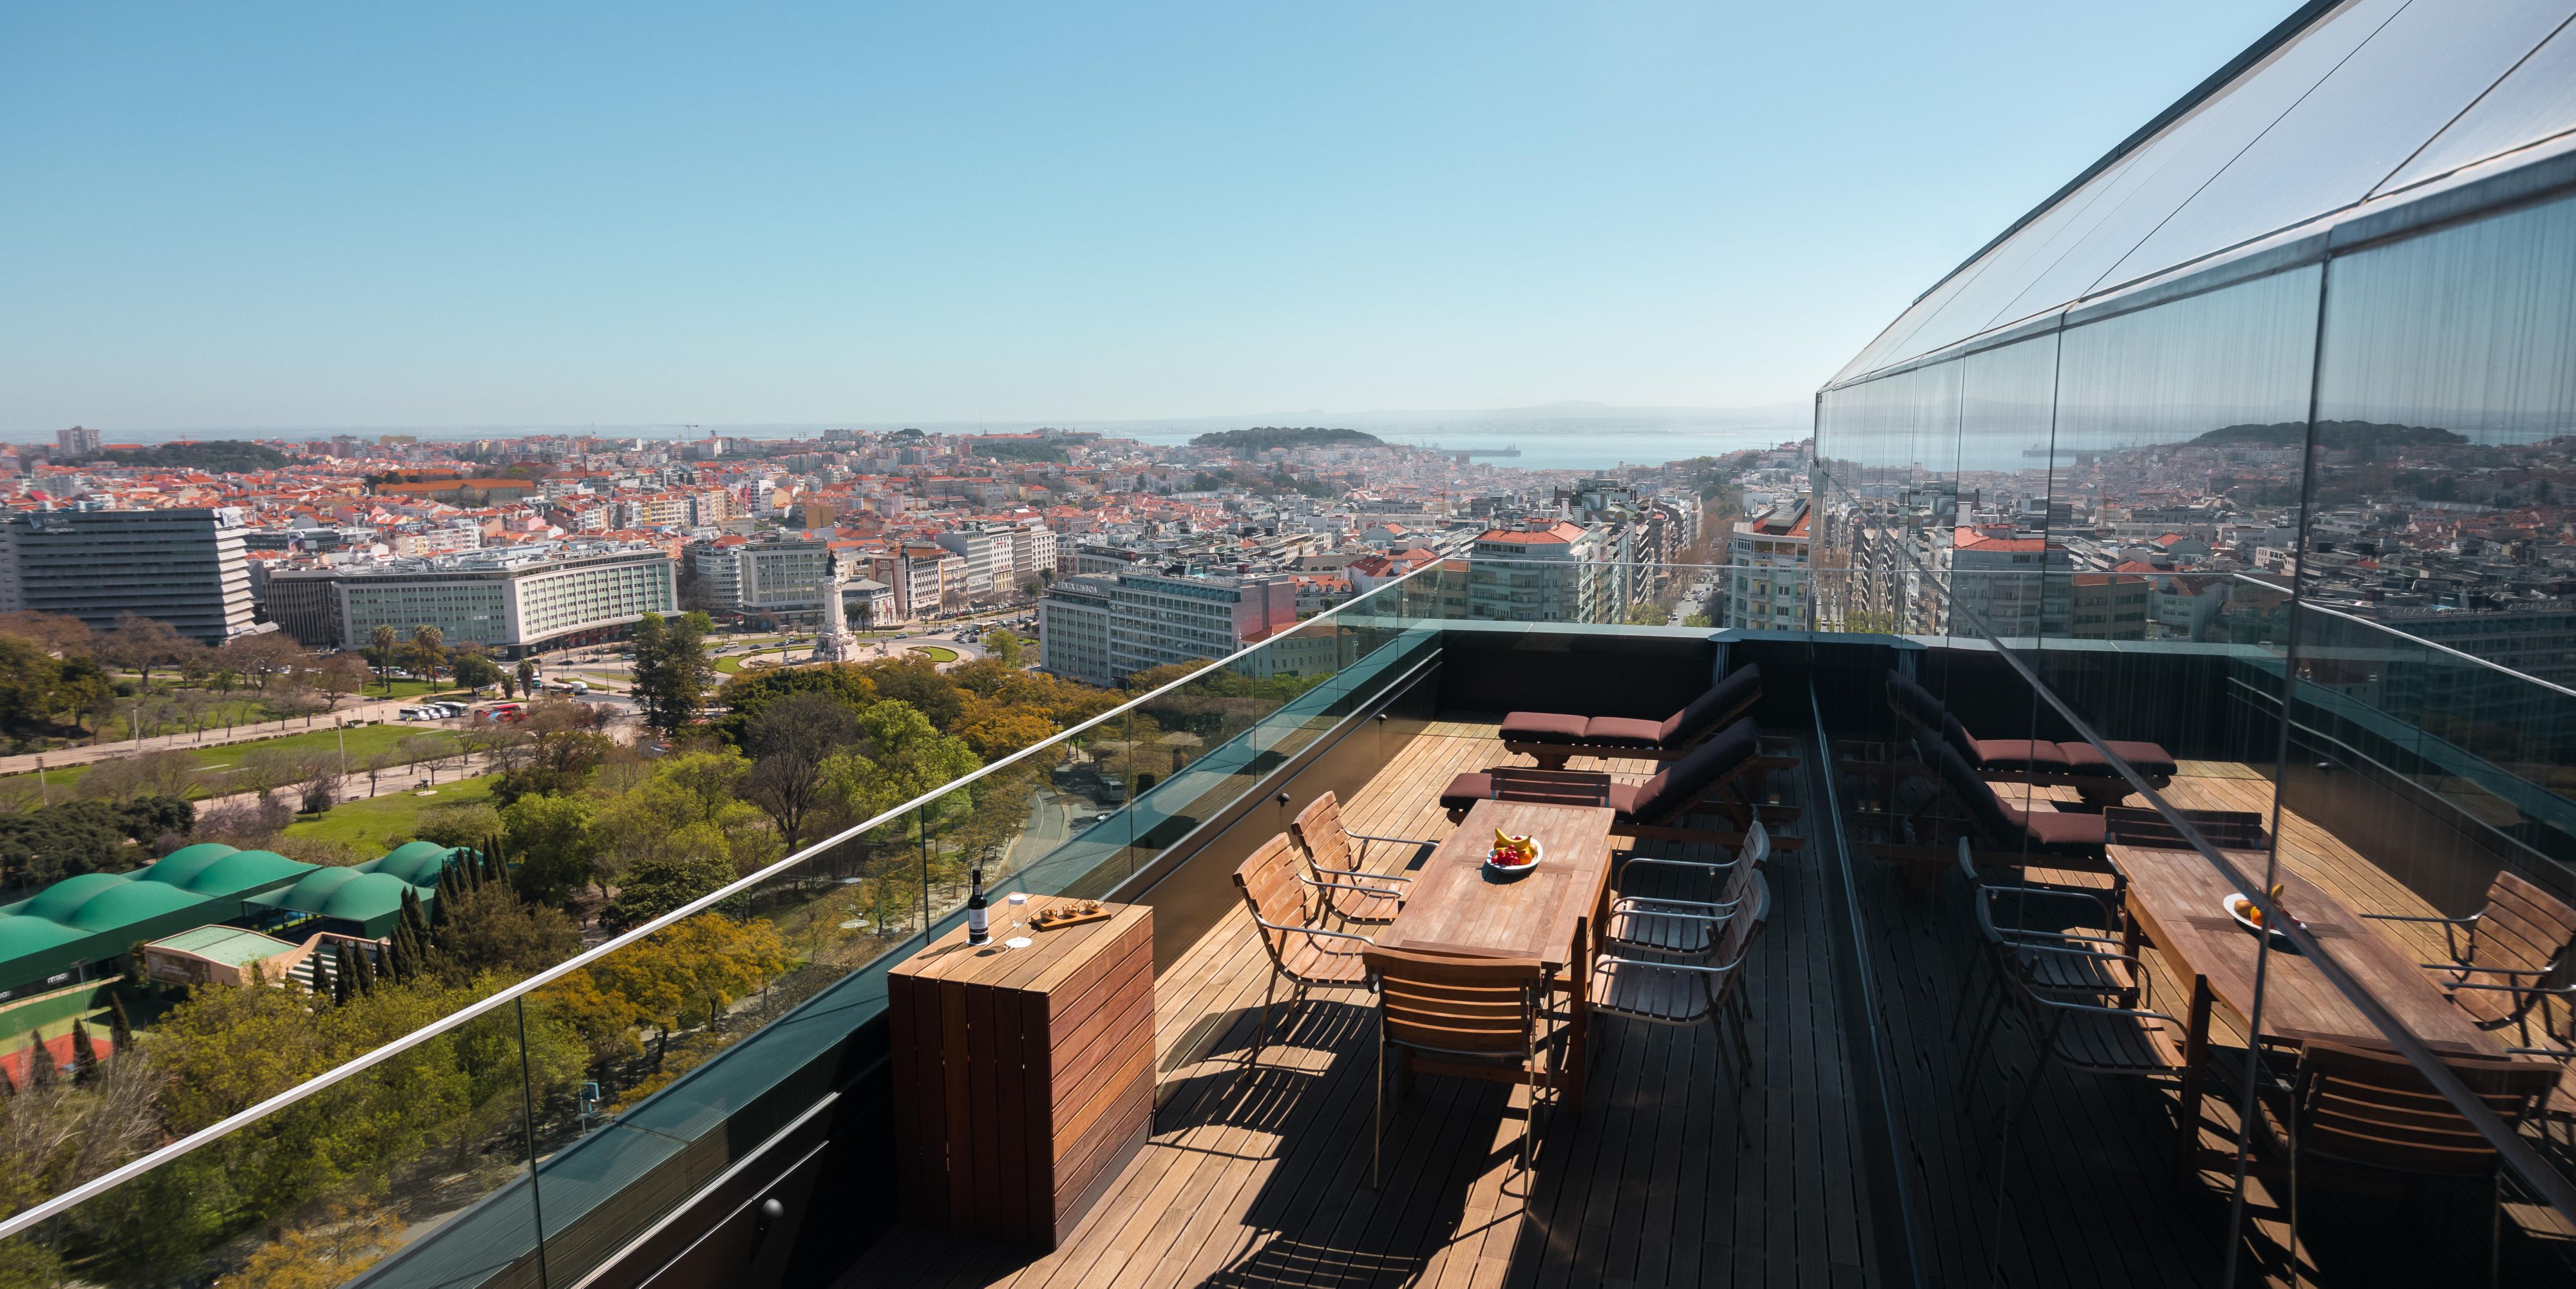 Our rooms and suites with balconies are distinguished by their exclusive location on the hotel's upper floors. Featuring a private terrace, these rooms boast an incredible view over the city and the river, making your stay in Lisbon unforgettable.